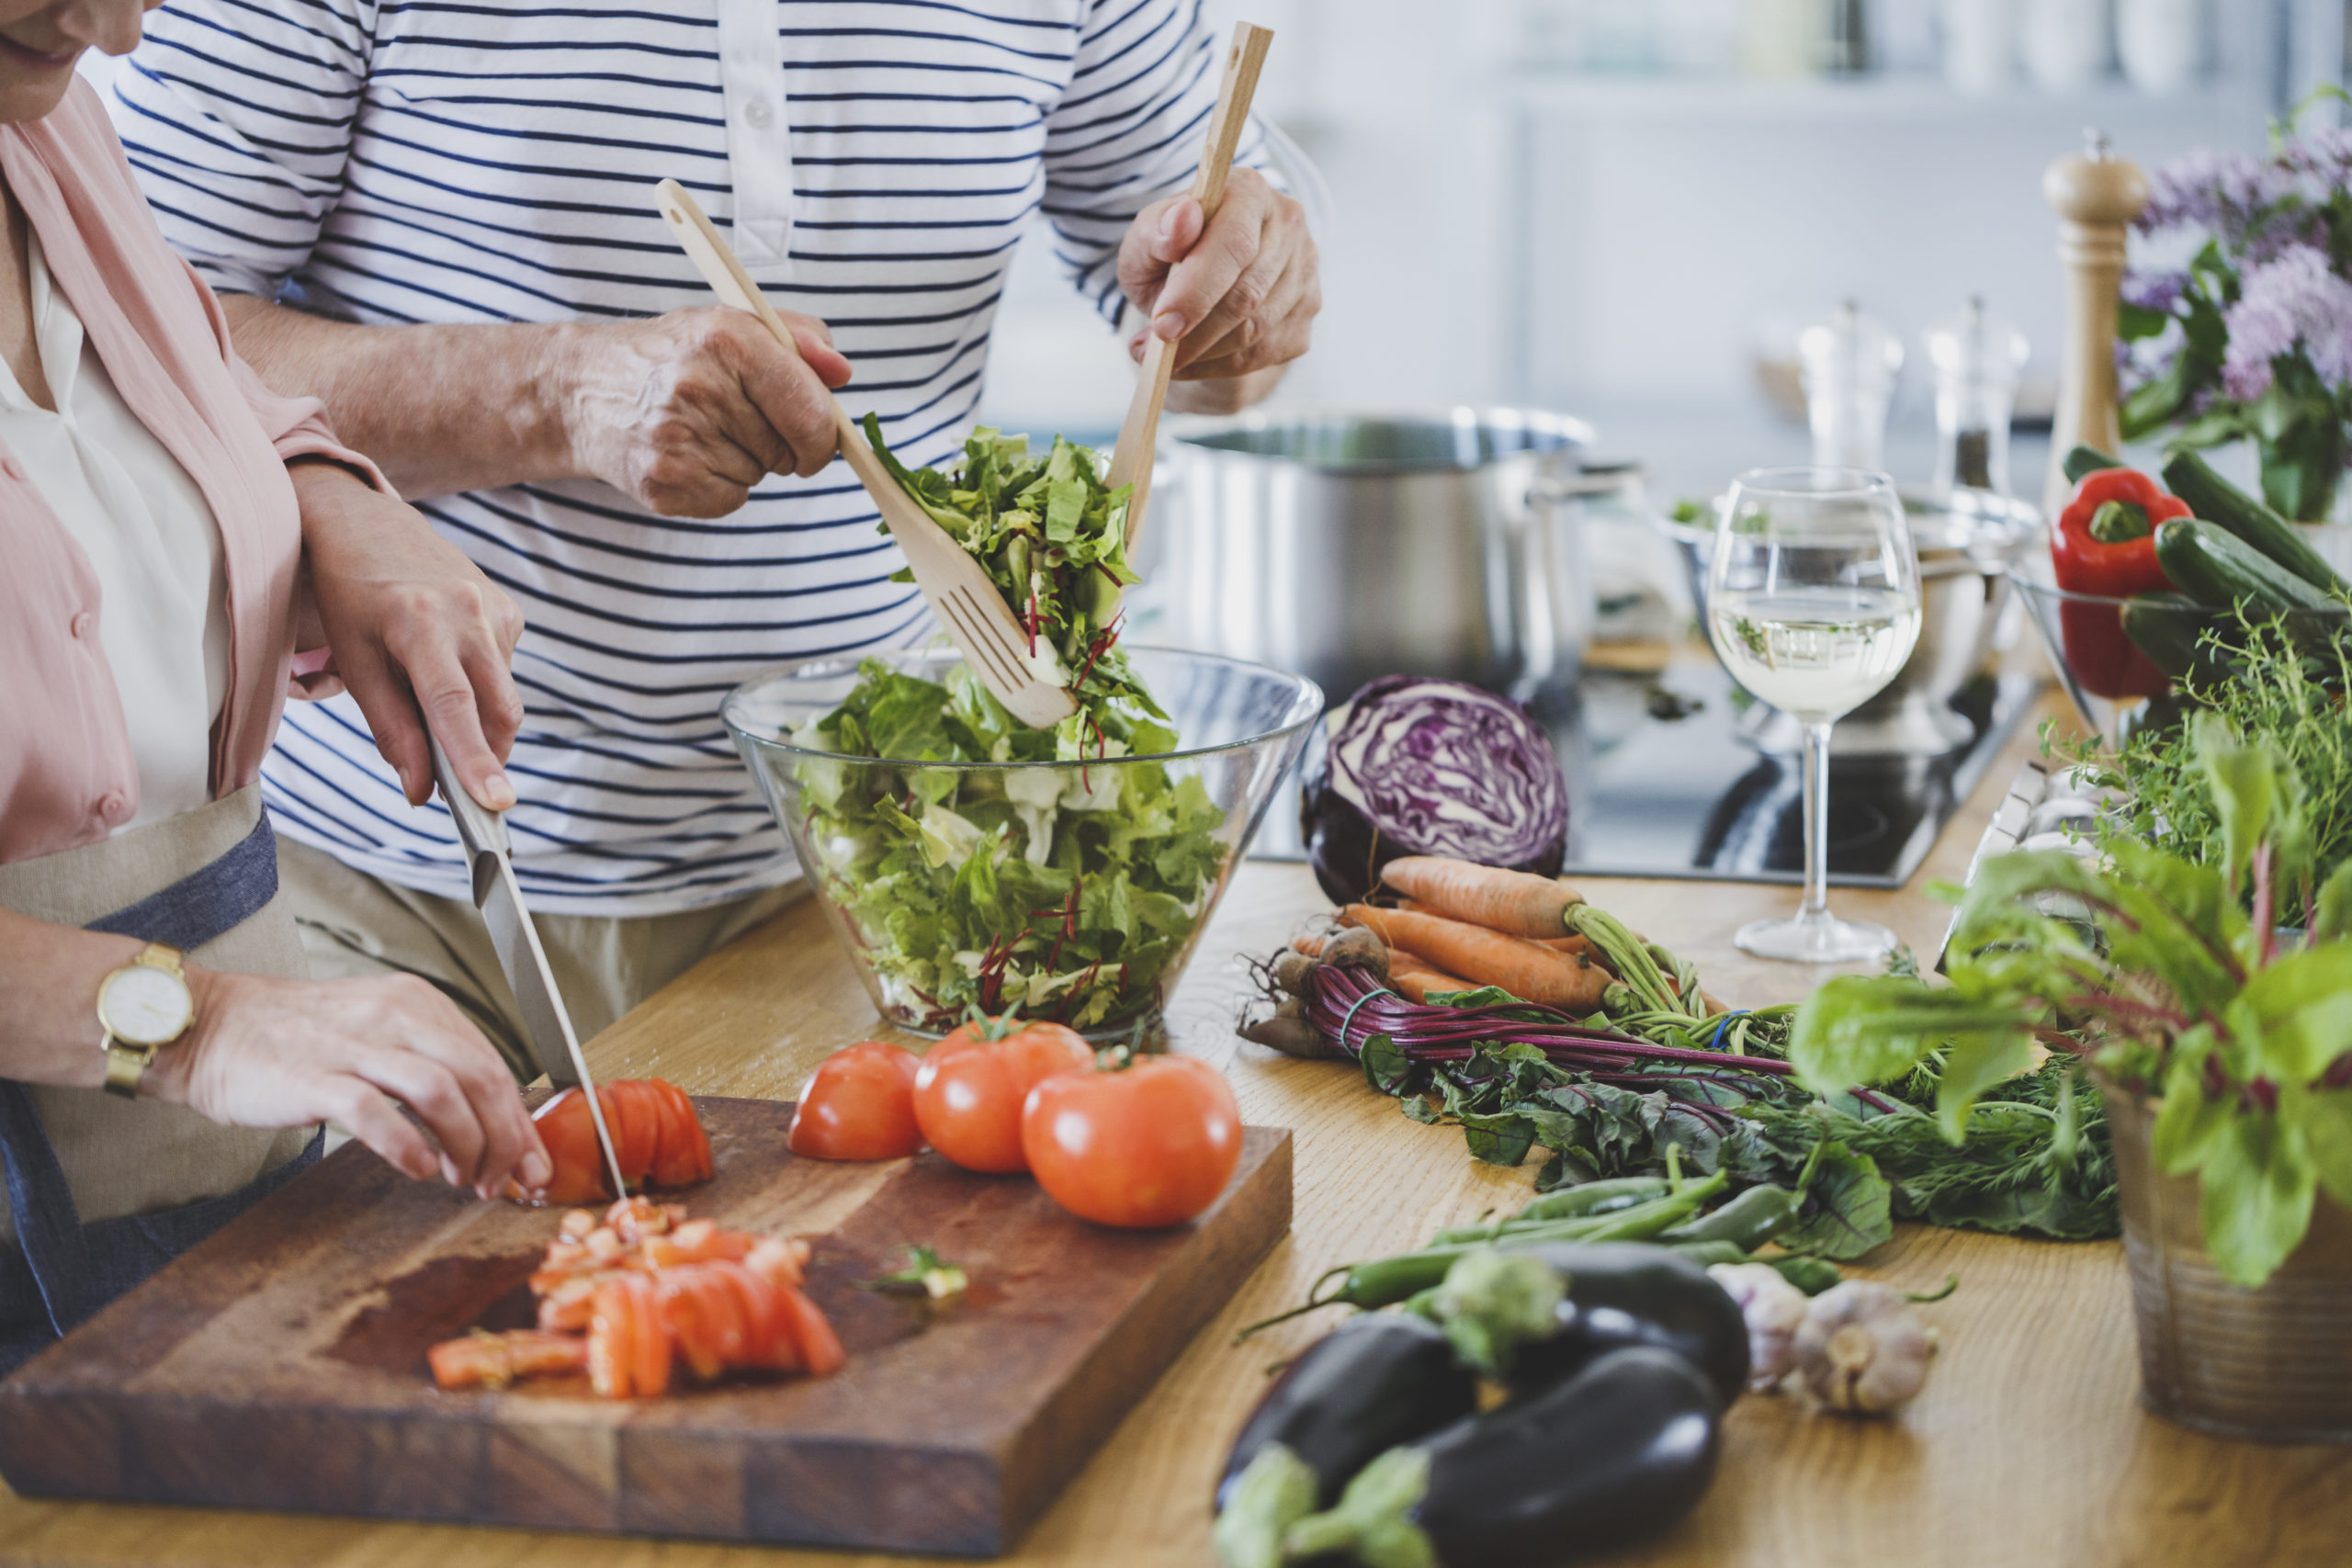 Cardiac caregiver embracing solutions for heart-healthy cooking | HealthDiscovery.org